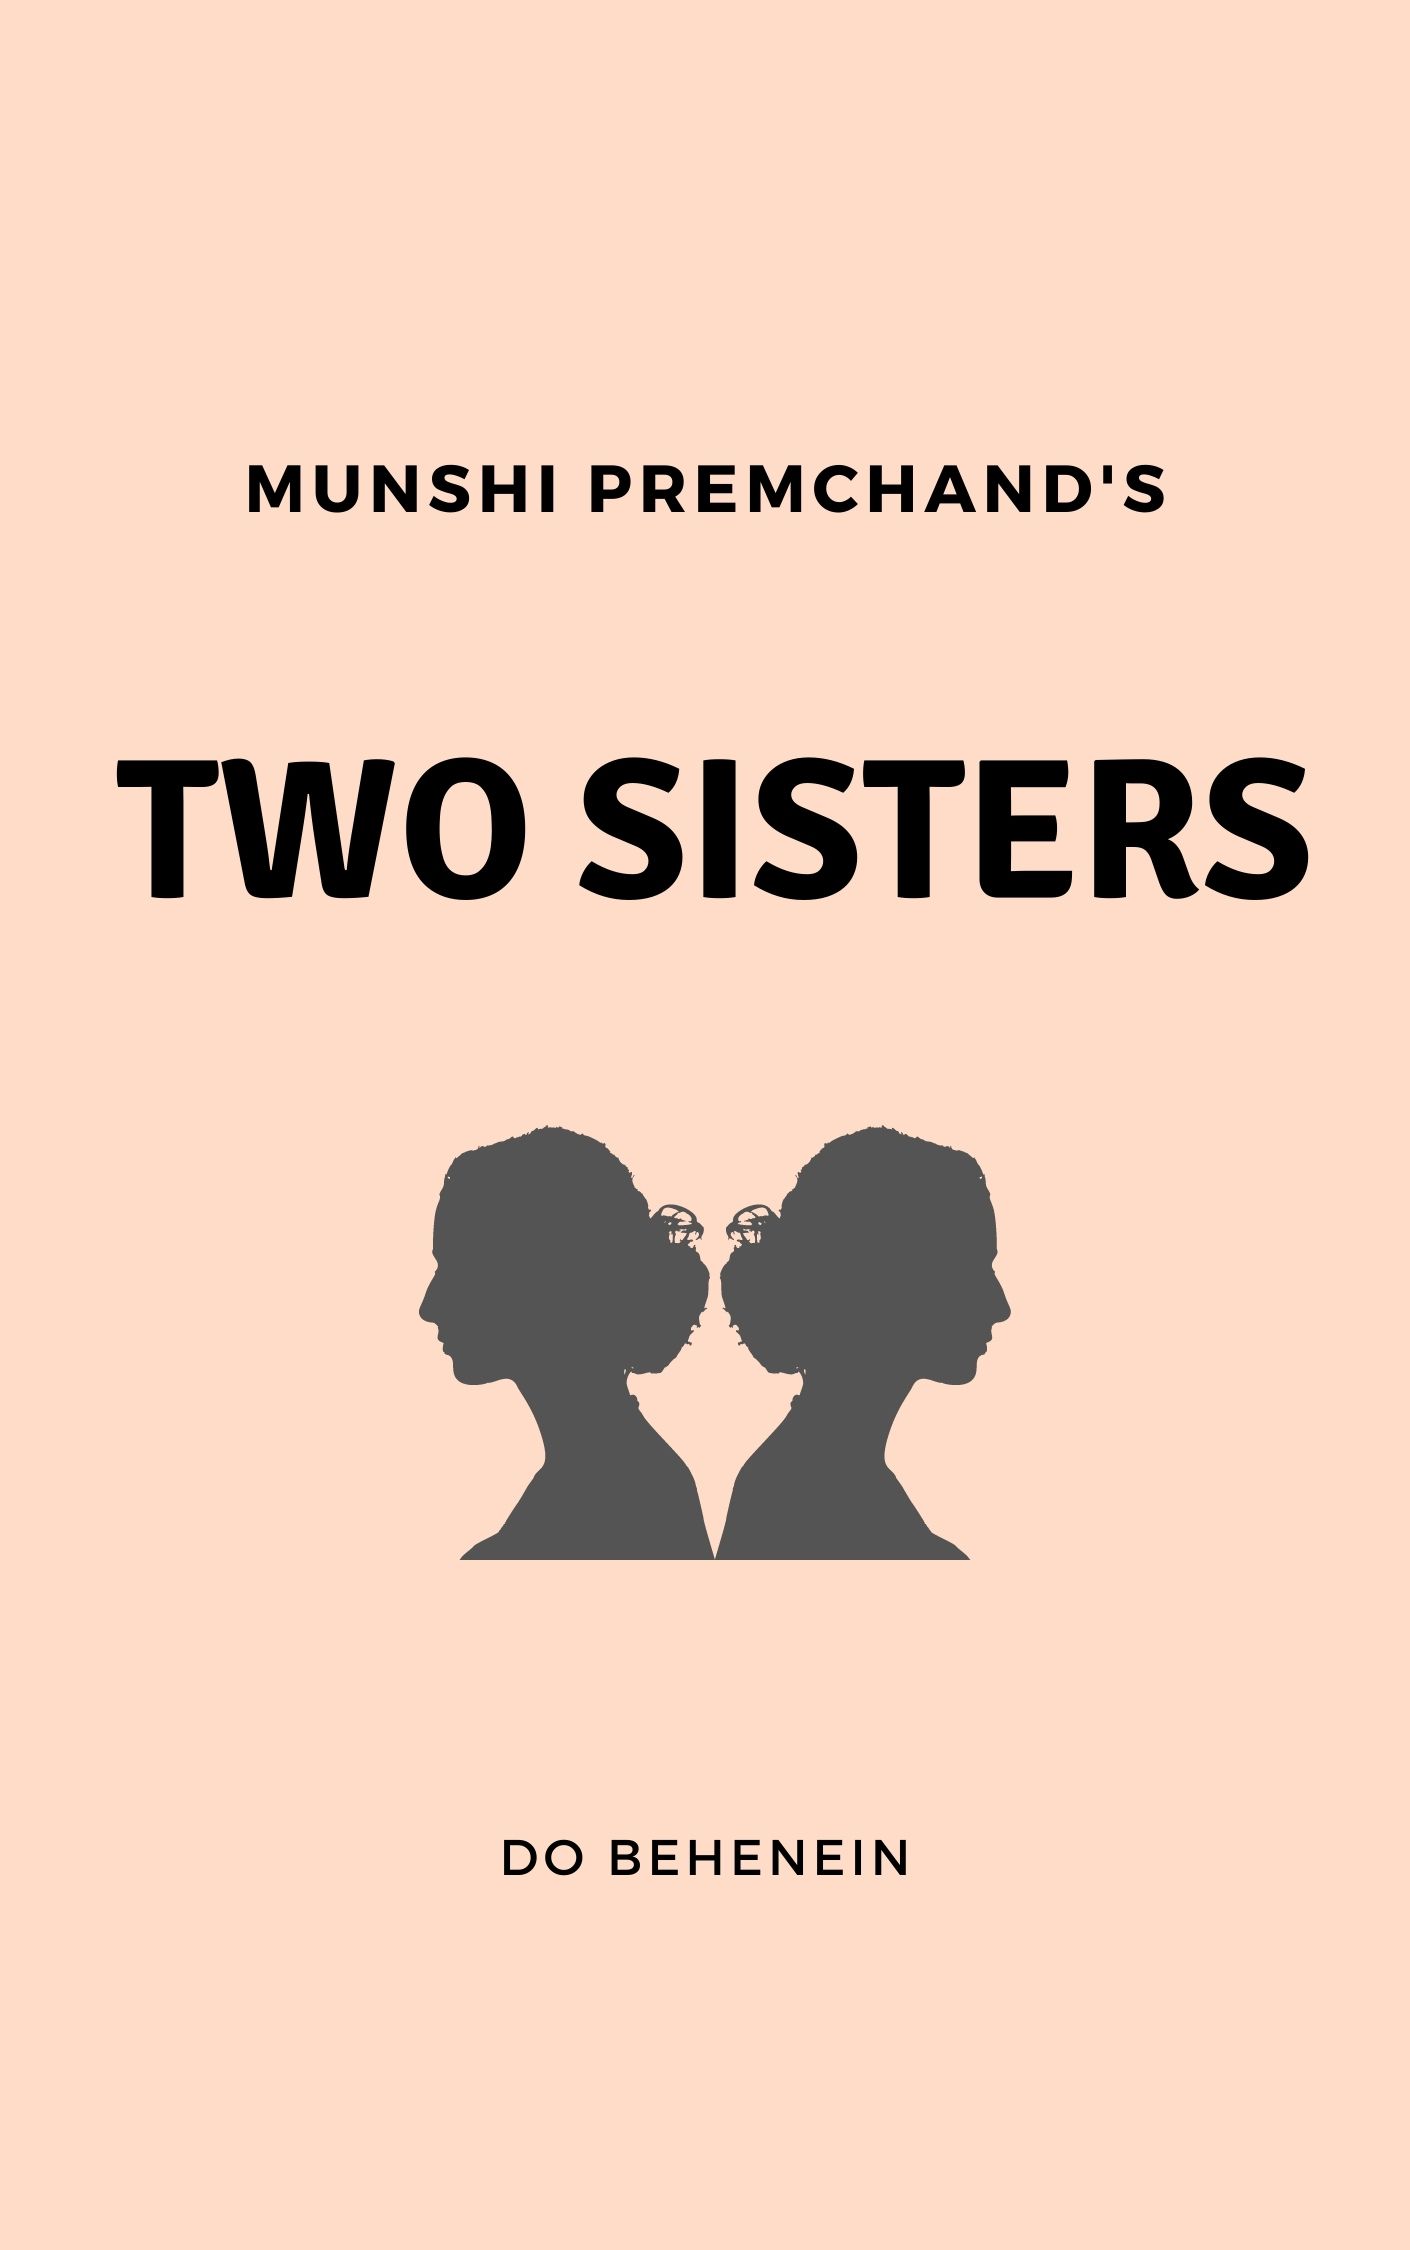 the two sisters short story